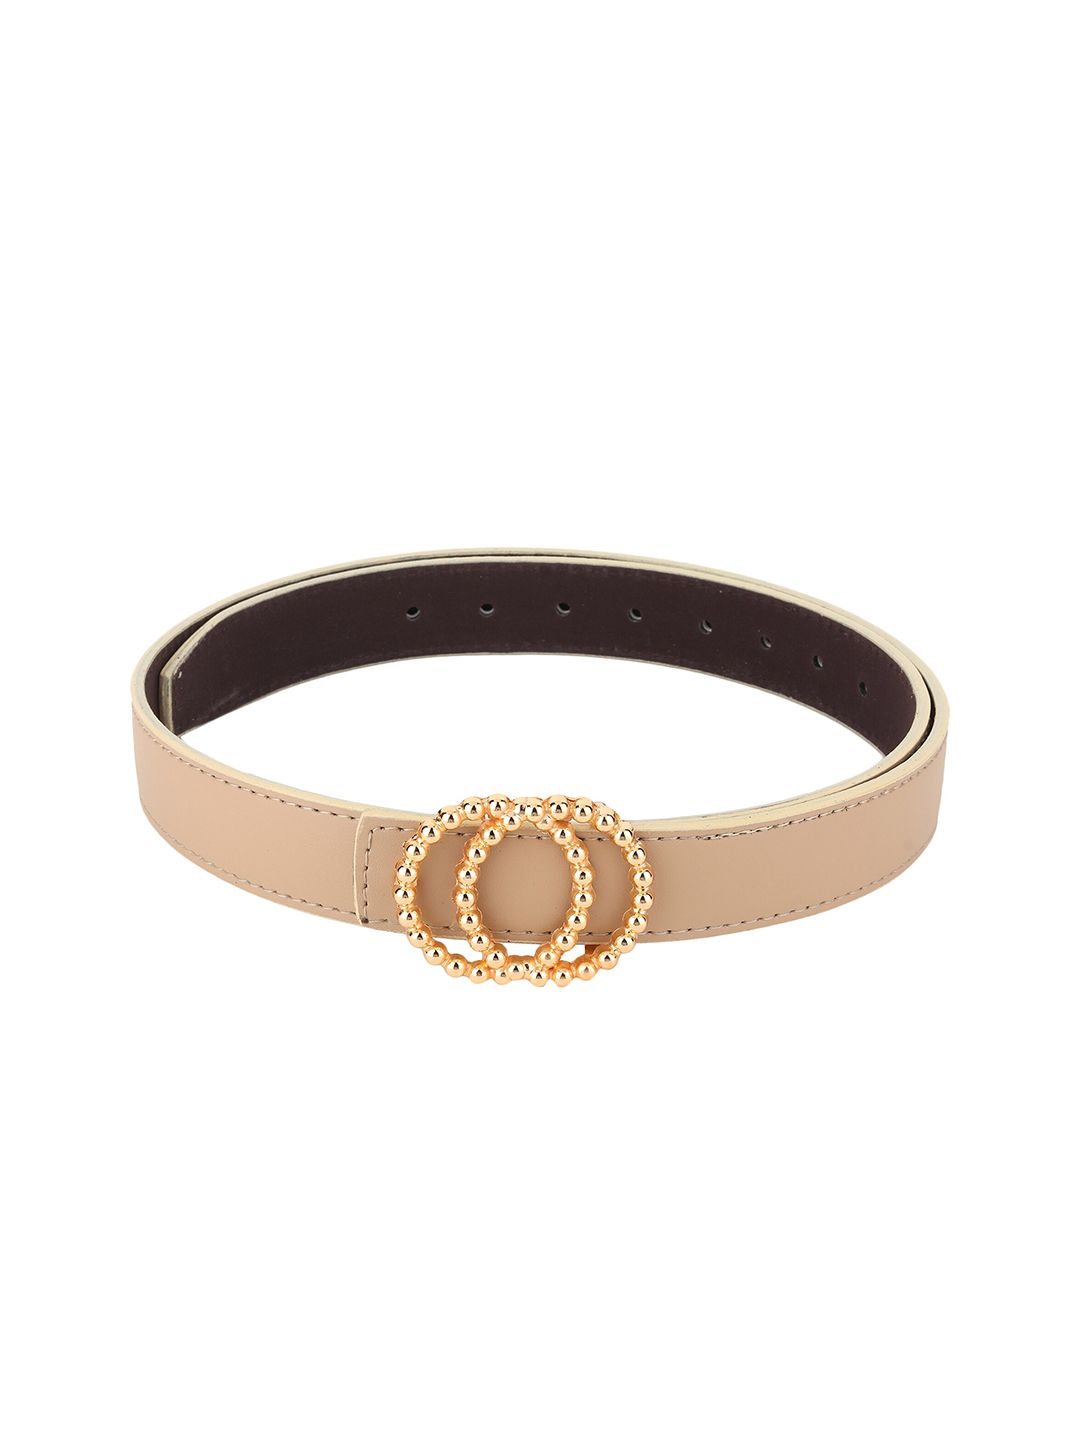 Kastner Women Beige & Gold-Toned Solid Synthetic Leather Belt Price in India